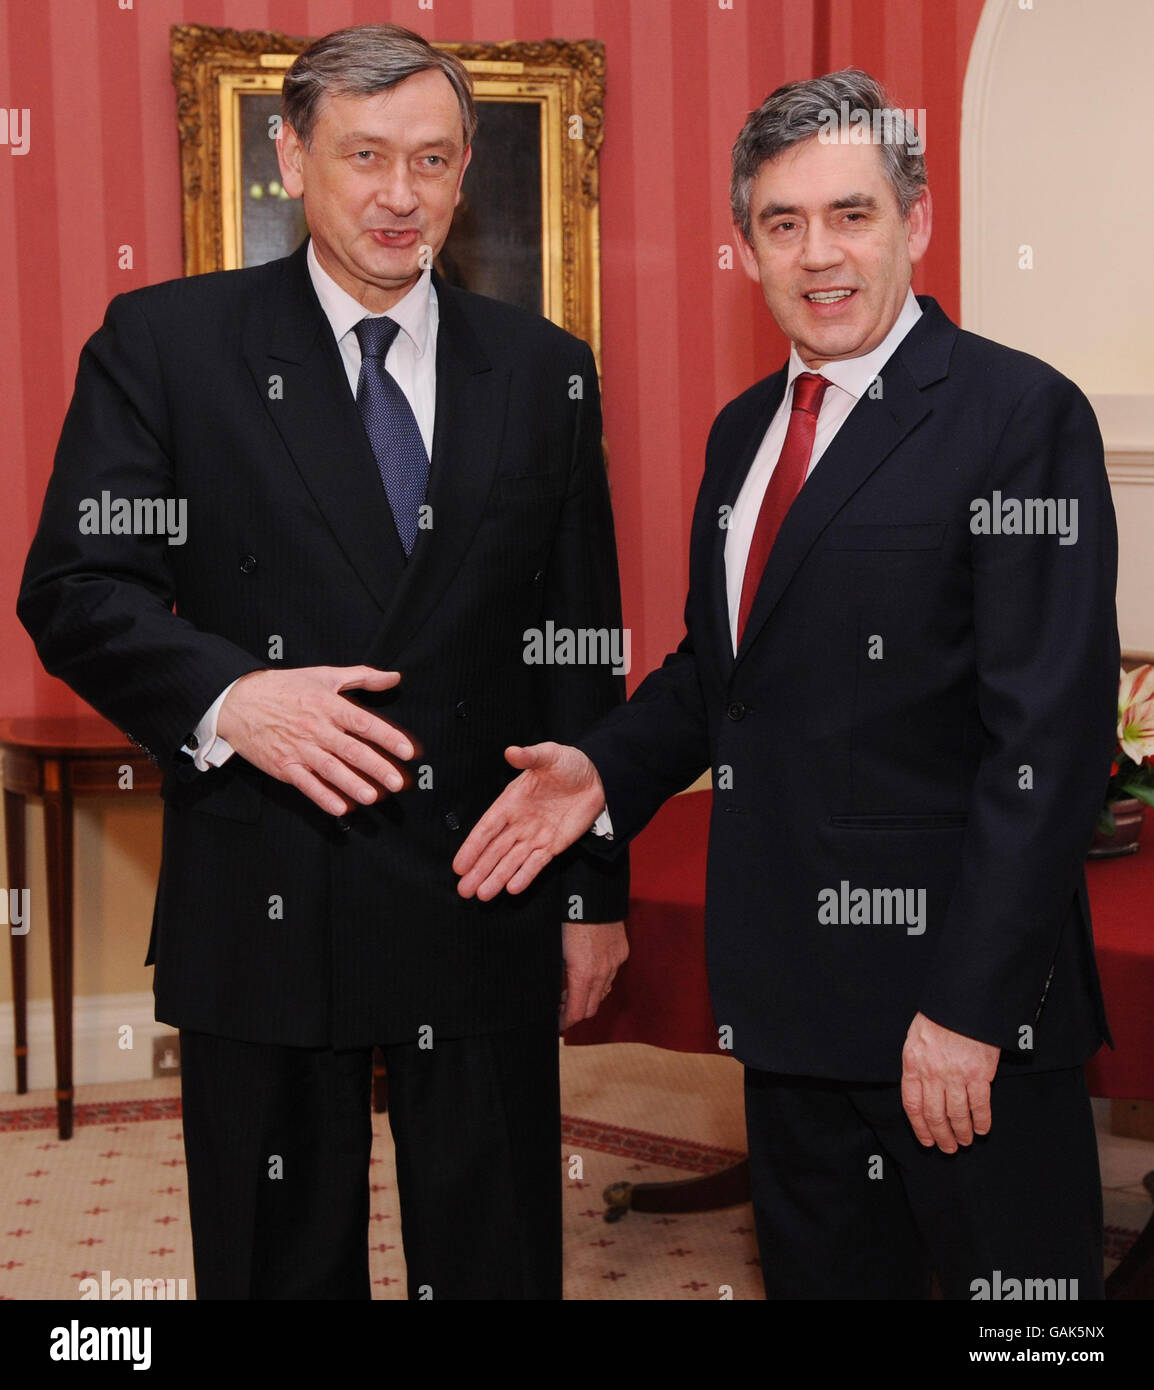 Prime Minister Gordon Brown (right) welcomes Danilo Turk, President of Slovenia to Downing Street today. Stock Photo